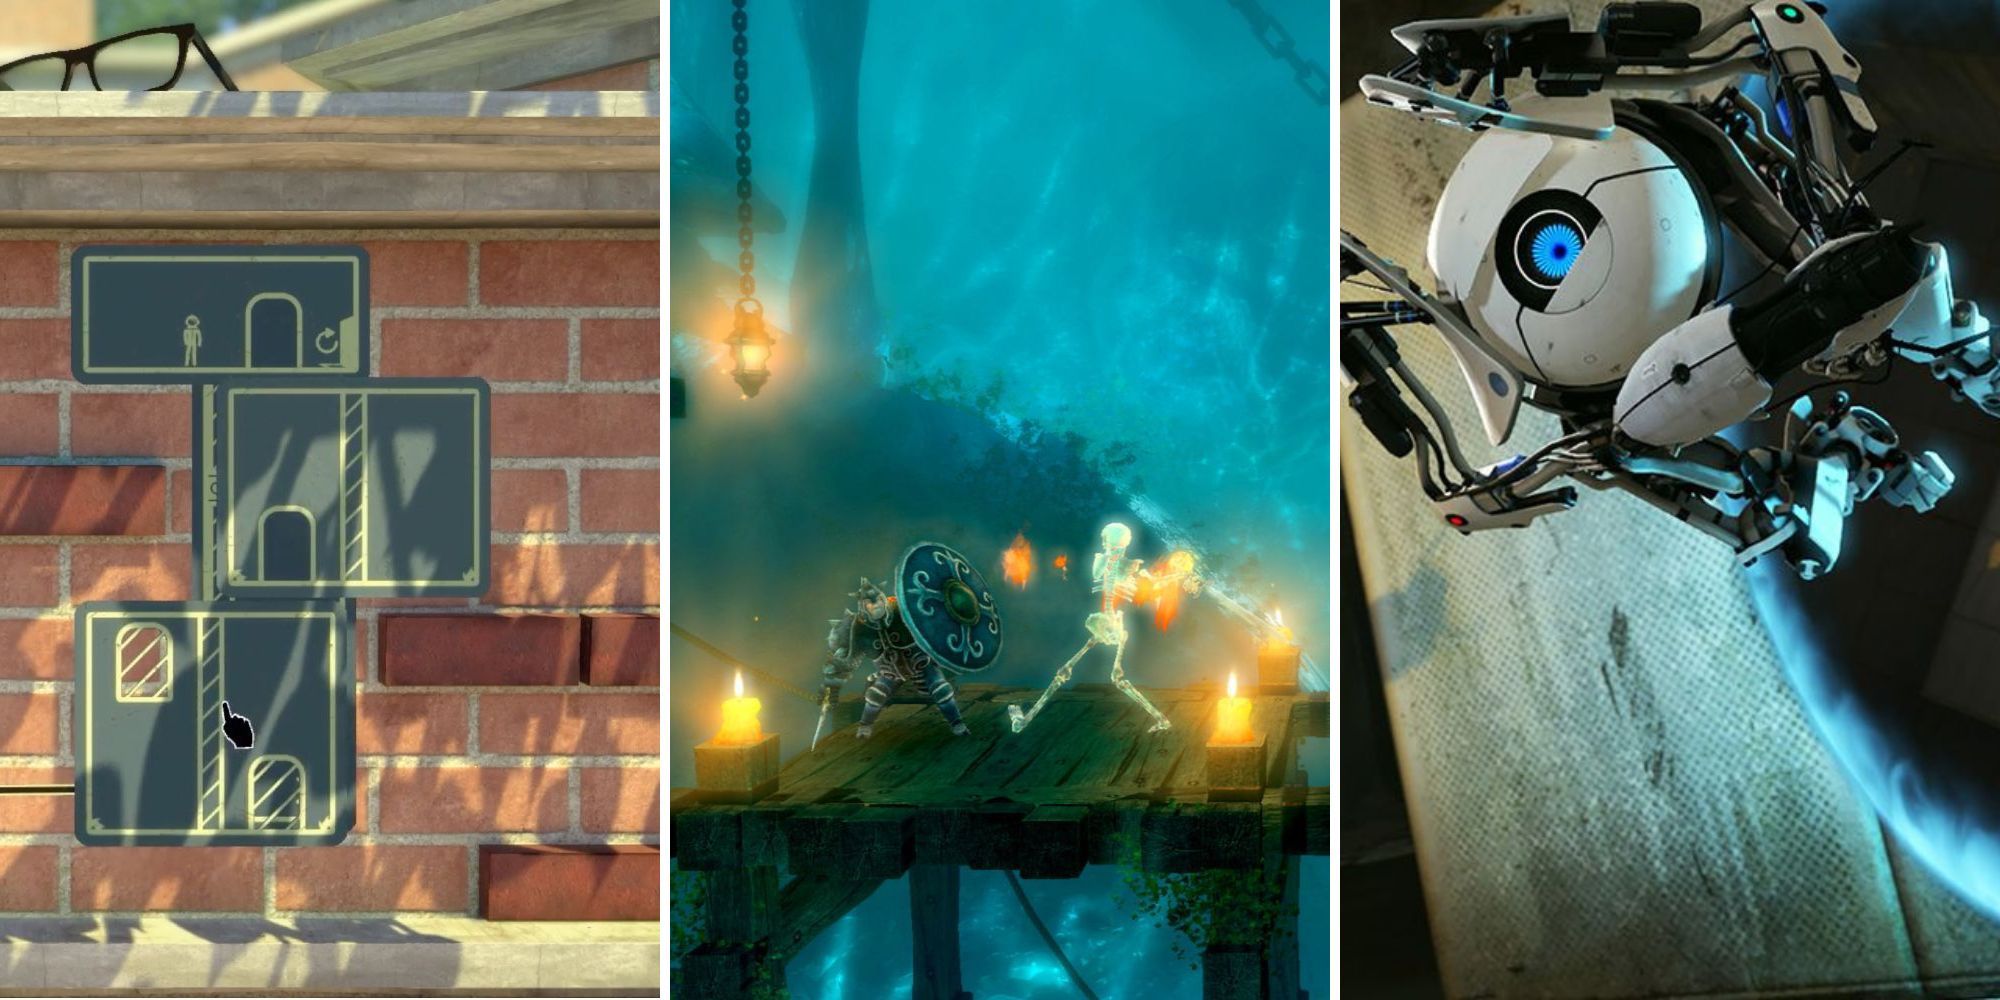 A grid showing the three puzzle platformers The Pedestrian, Trine, and Portal 2